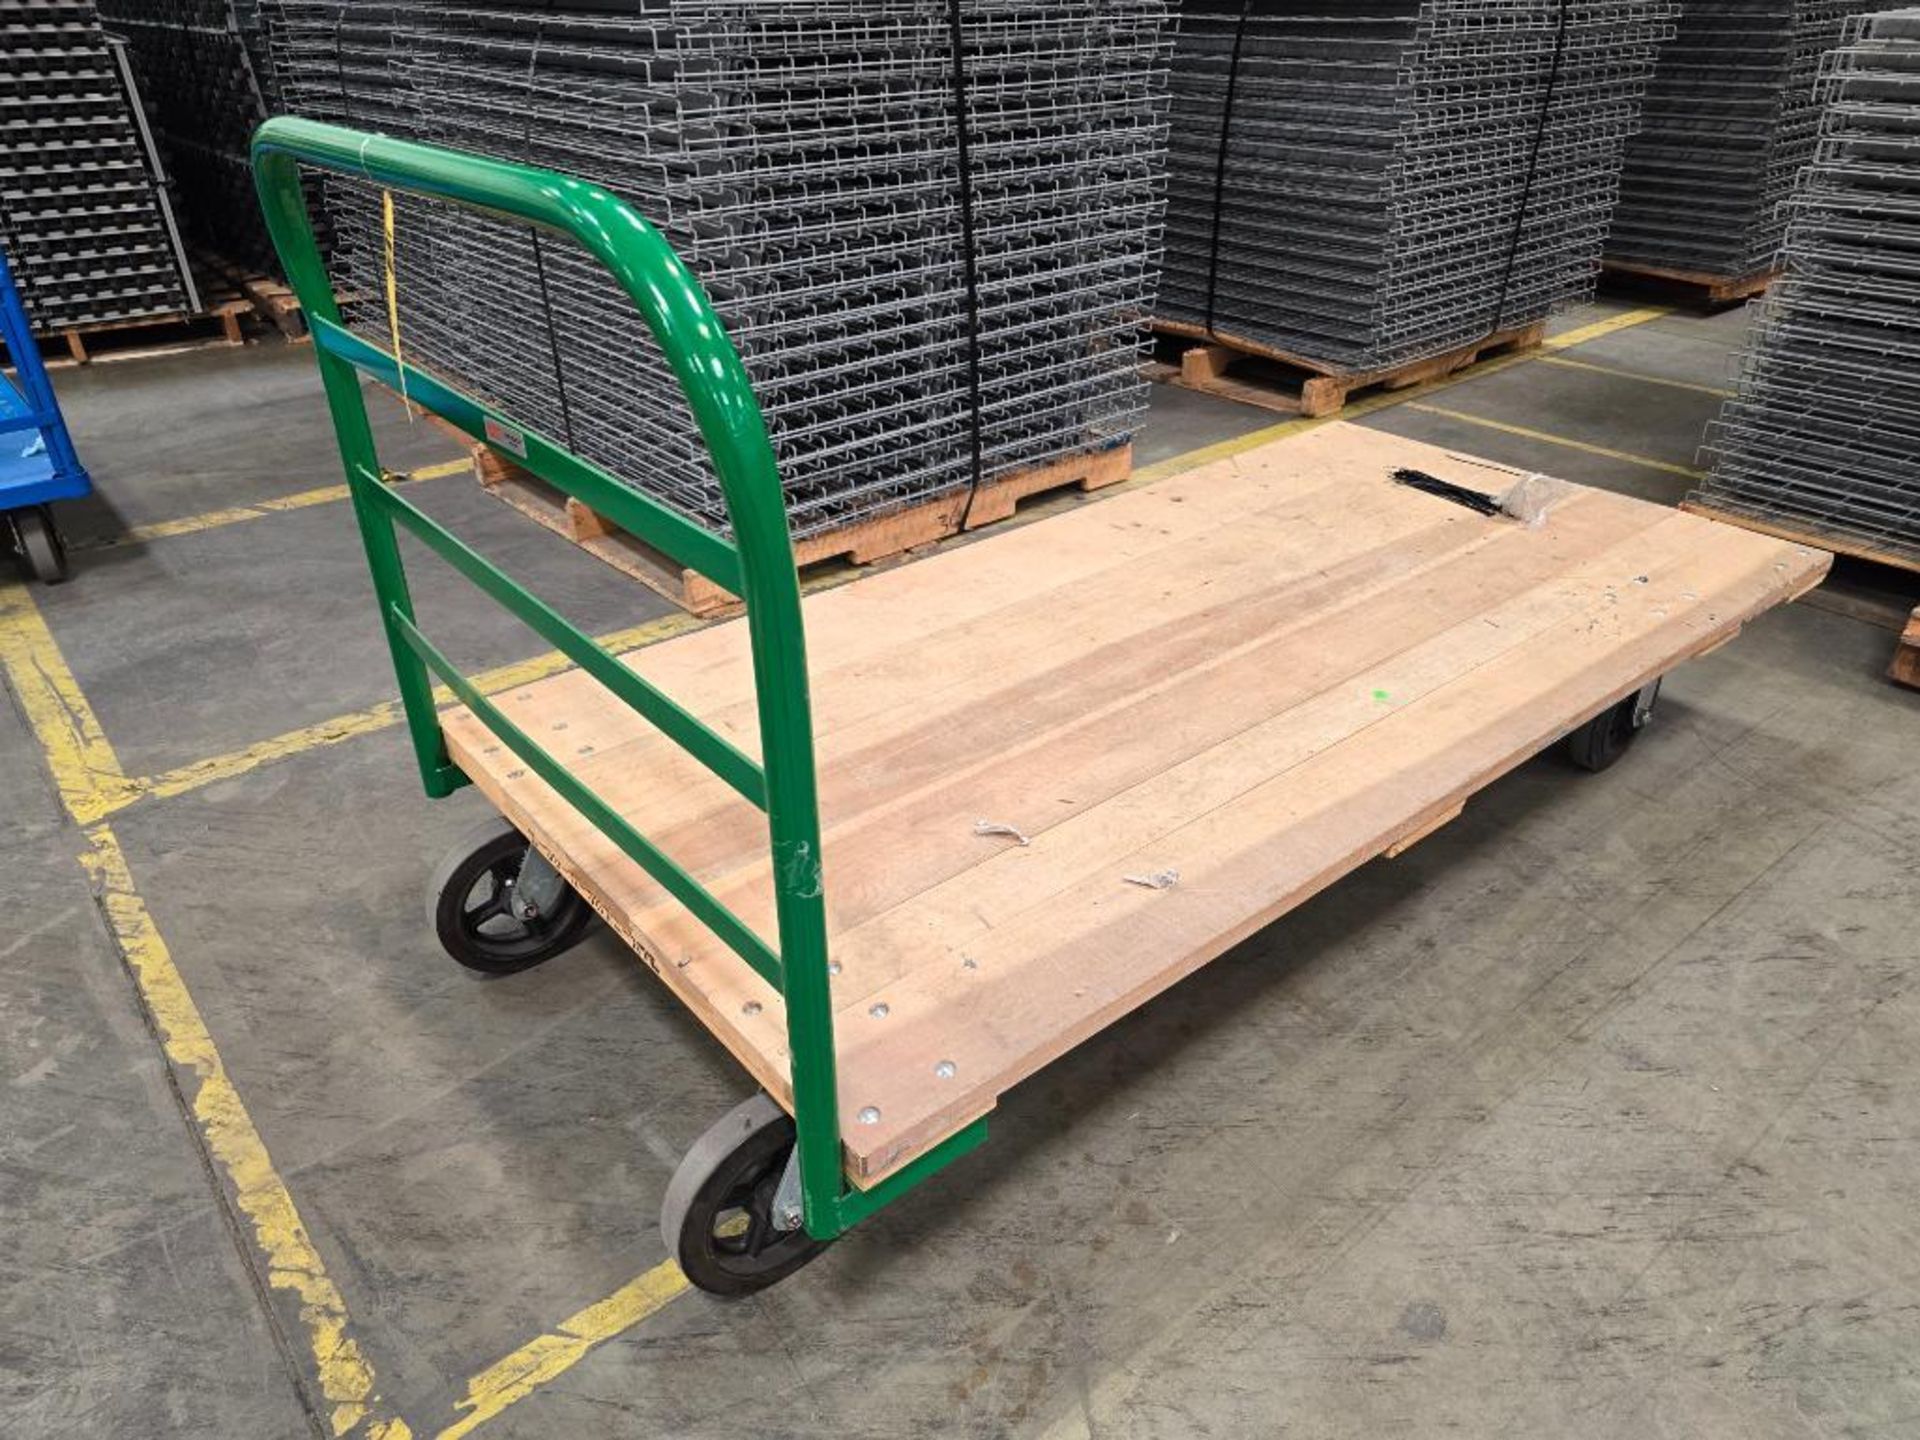 Wood Deck Flat Cart, 72" X 36" ($10 Loading Fee Will Be Added To Buyer's Invoice) - Image 2 of 5